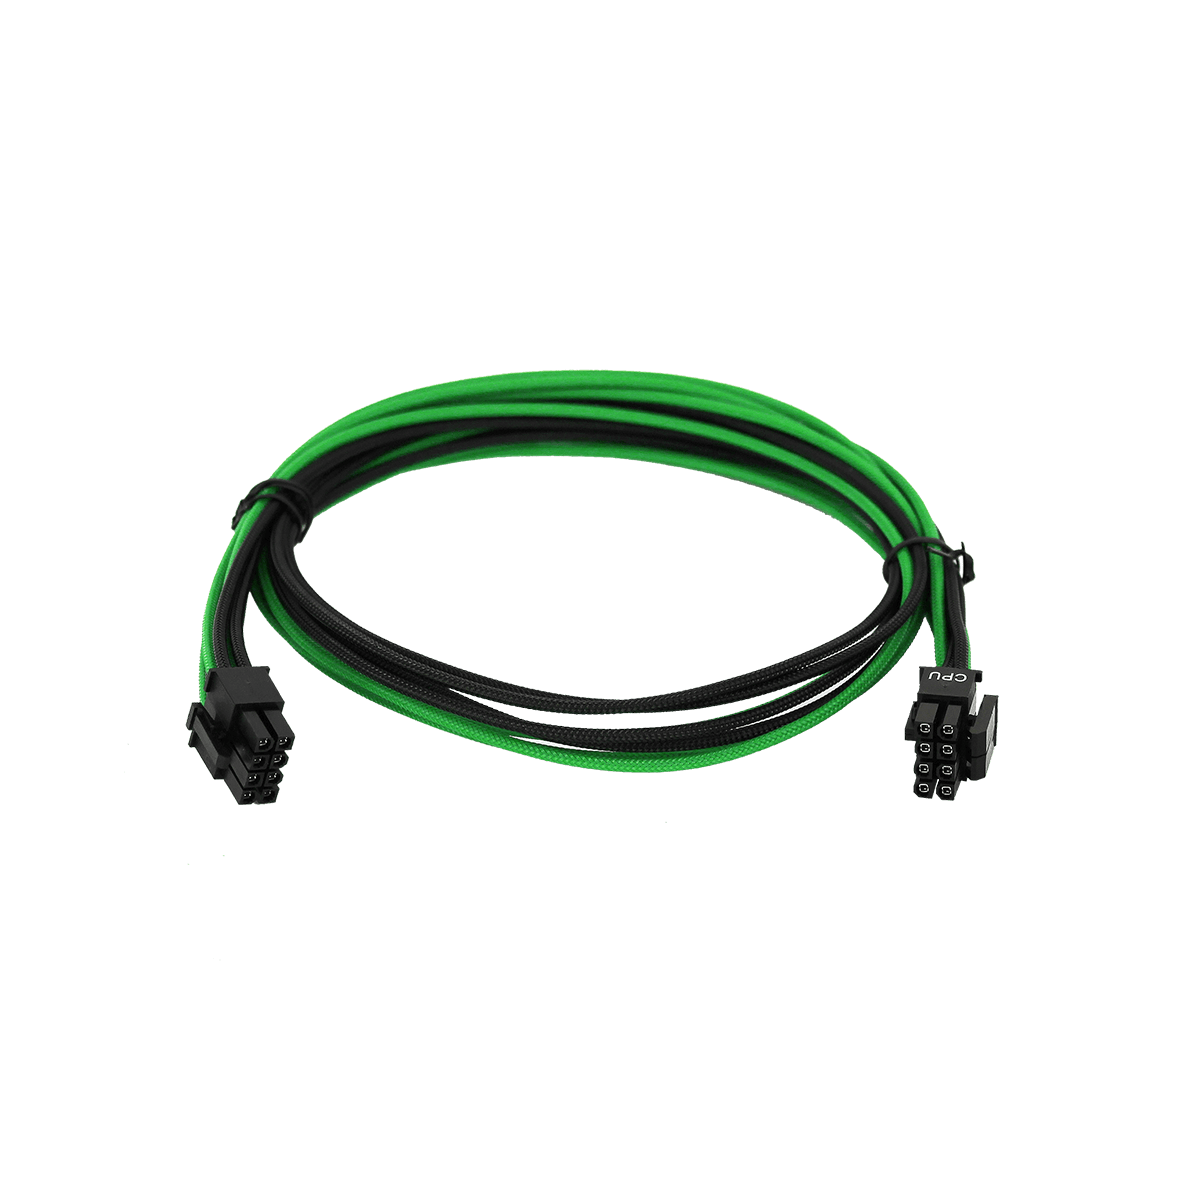 Evga Products 450 850 B3 B5 G2 G3 G5 Gp Gm P2 Pq T2 Green Black Power Supply Cable Set Individually Sleeved 100 G2 08kg B9